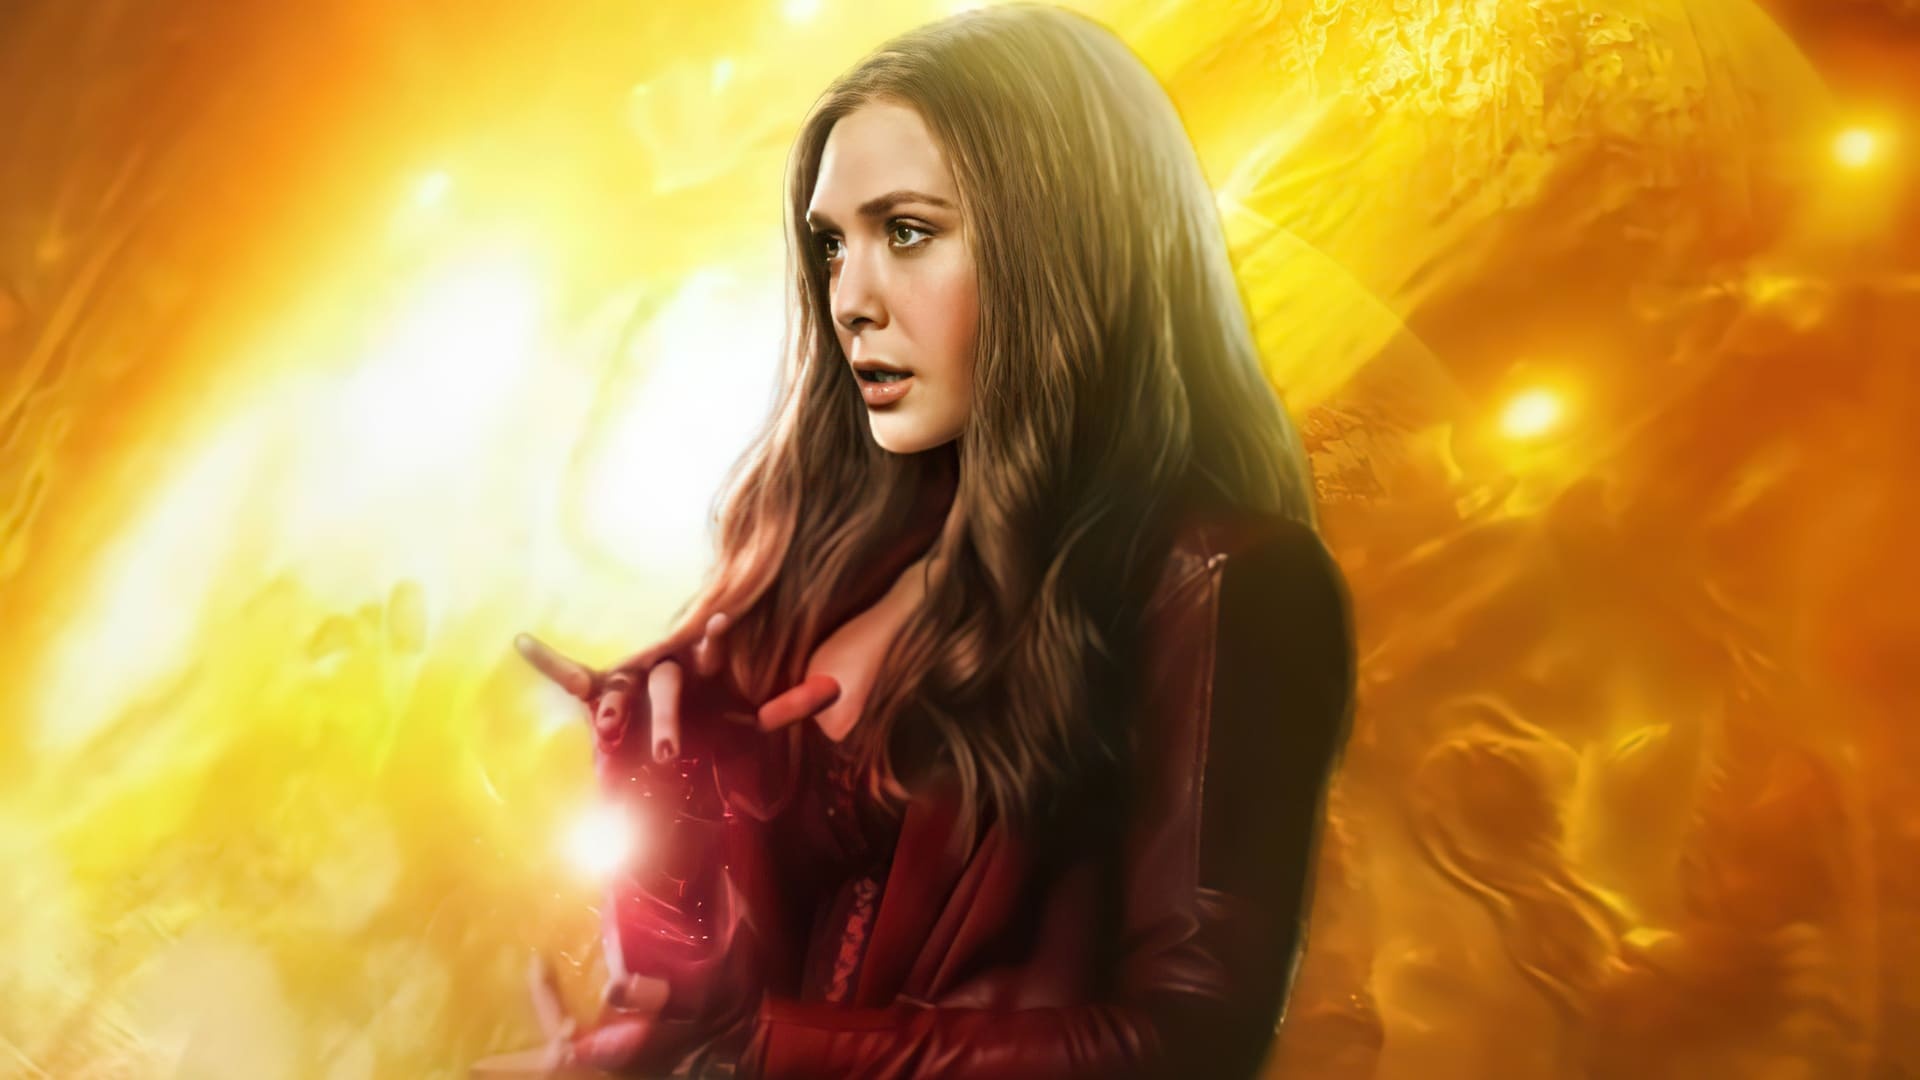 Scarlet Witch, Top Scarlet Witch wallpapers, Best quality, Downloadable backgrounds, 1920x1080 Full HD Desktop